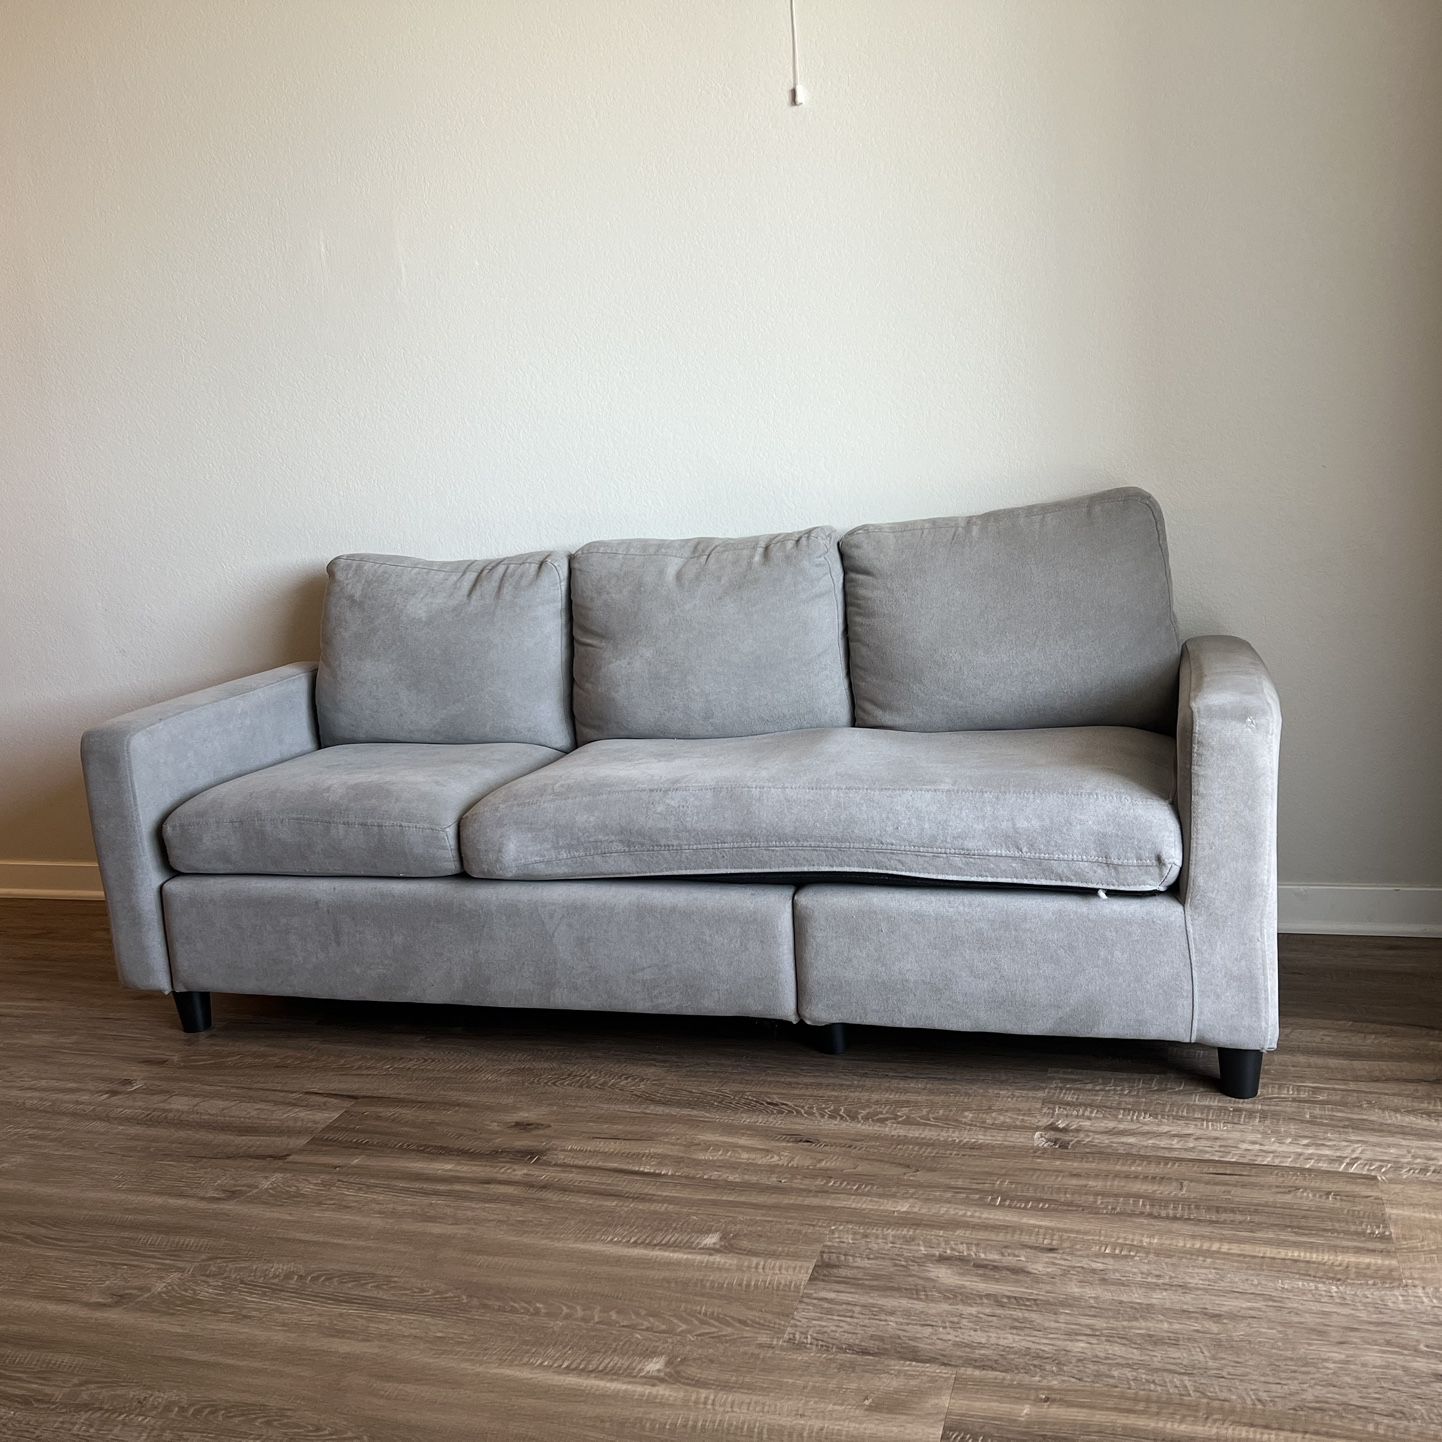 Grey Couch/Sofa